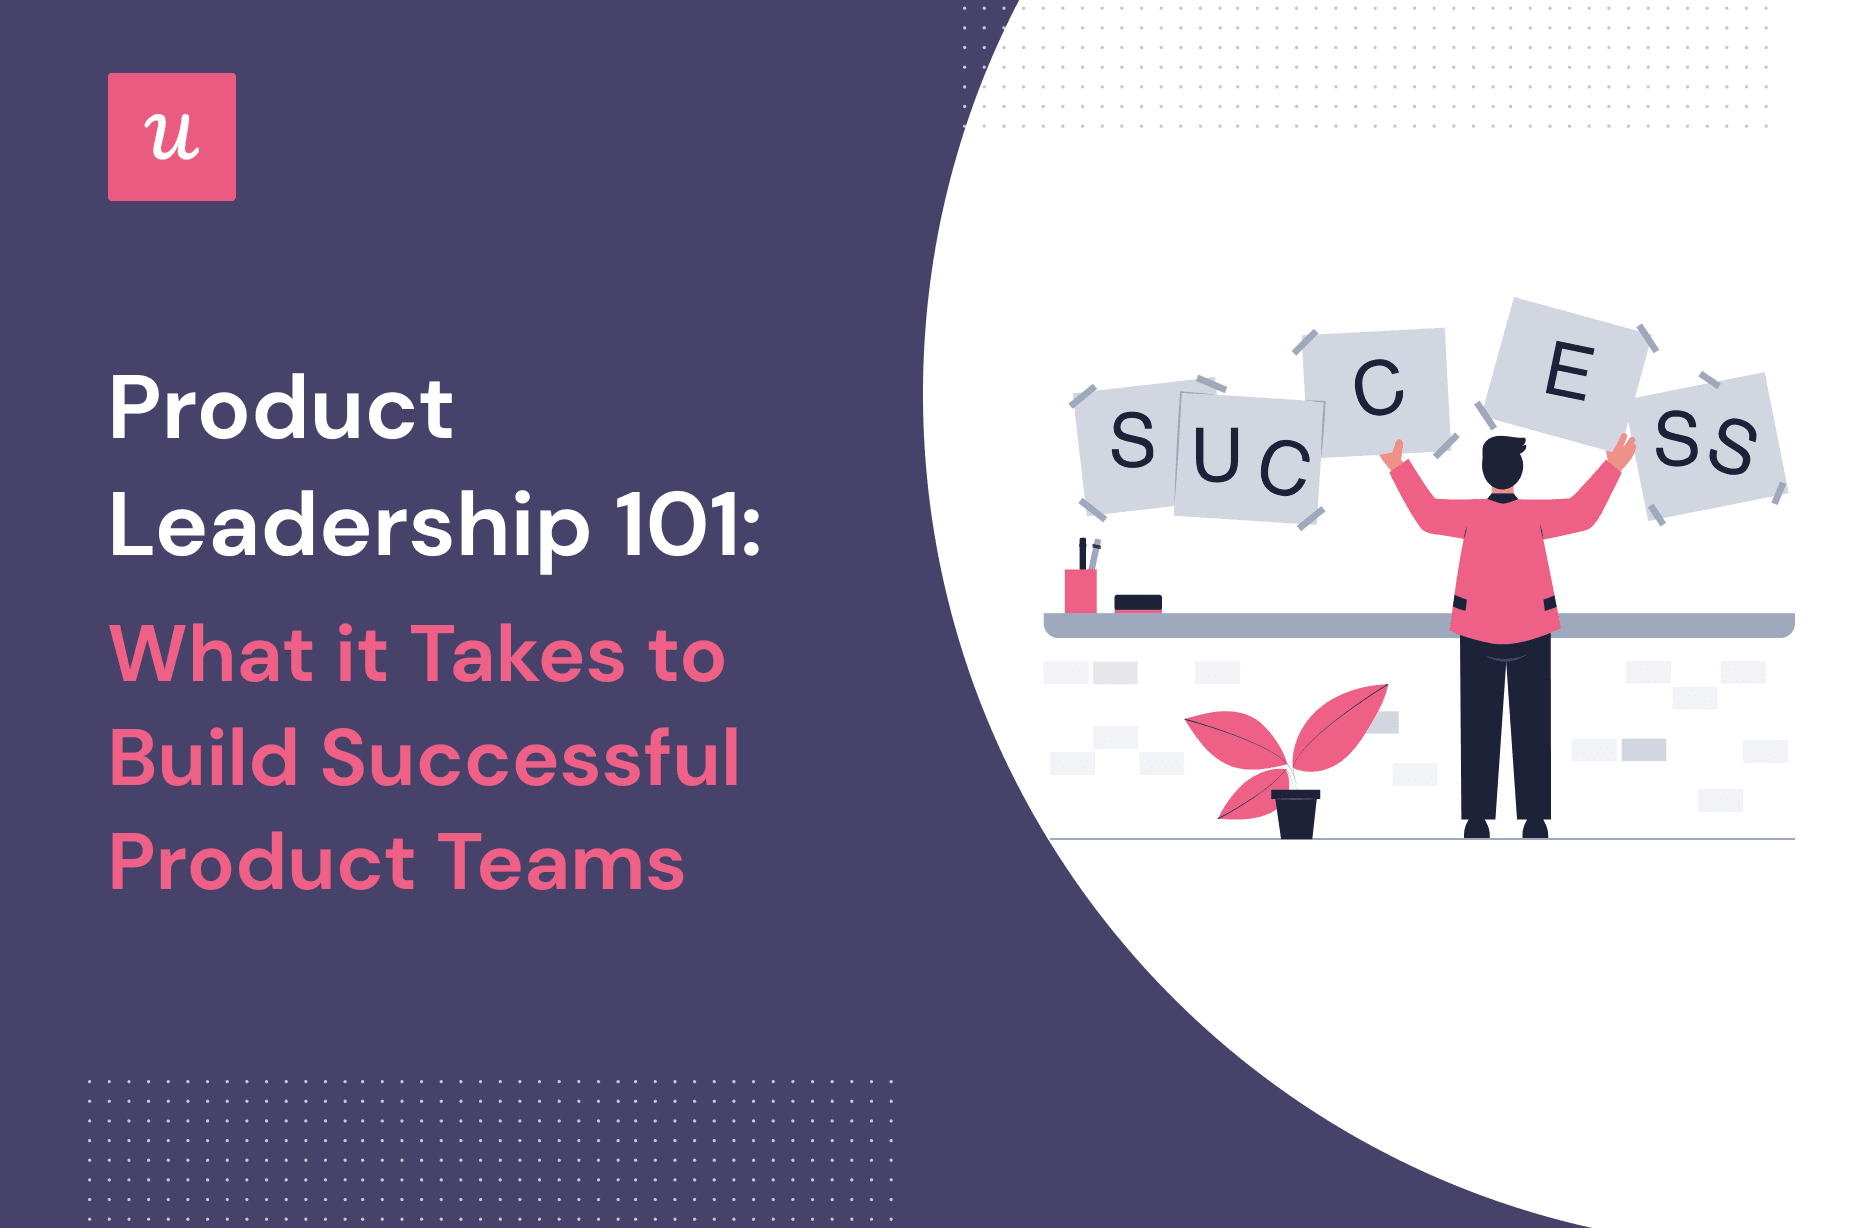 Product Leadership 101: What It Takes To Build Successful Product Teams